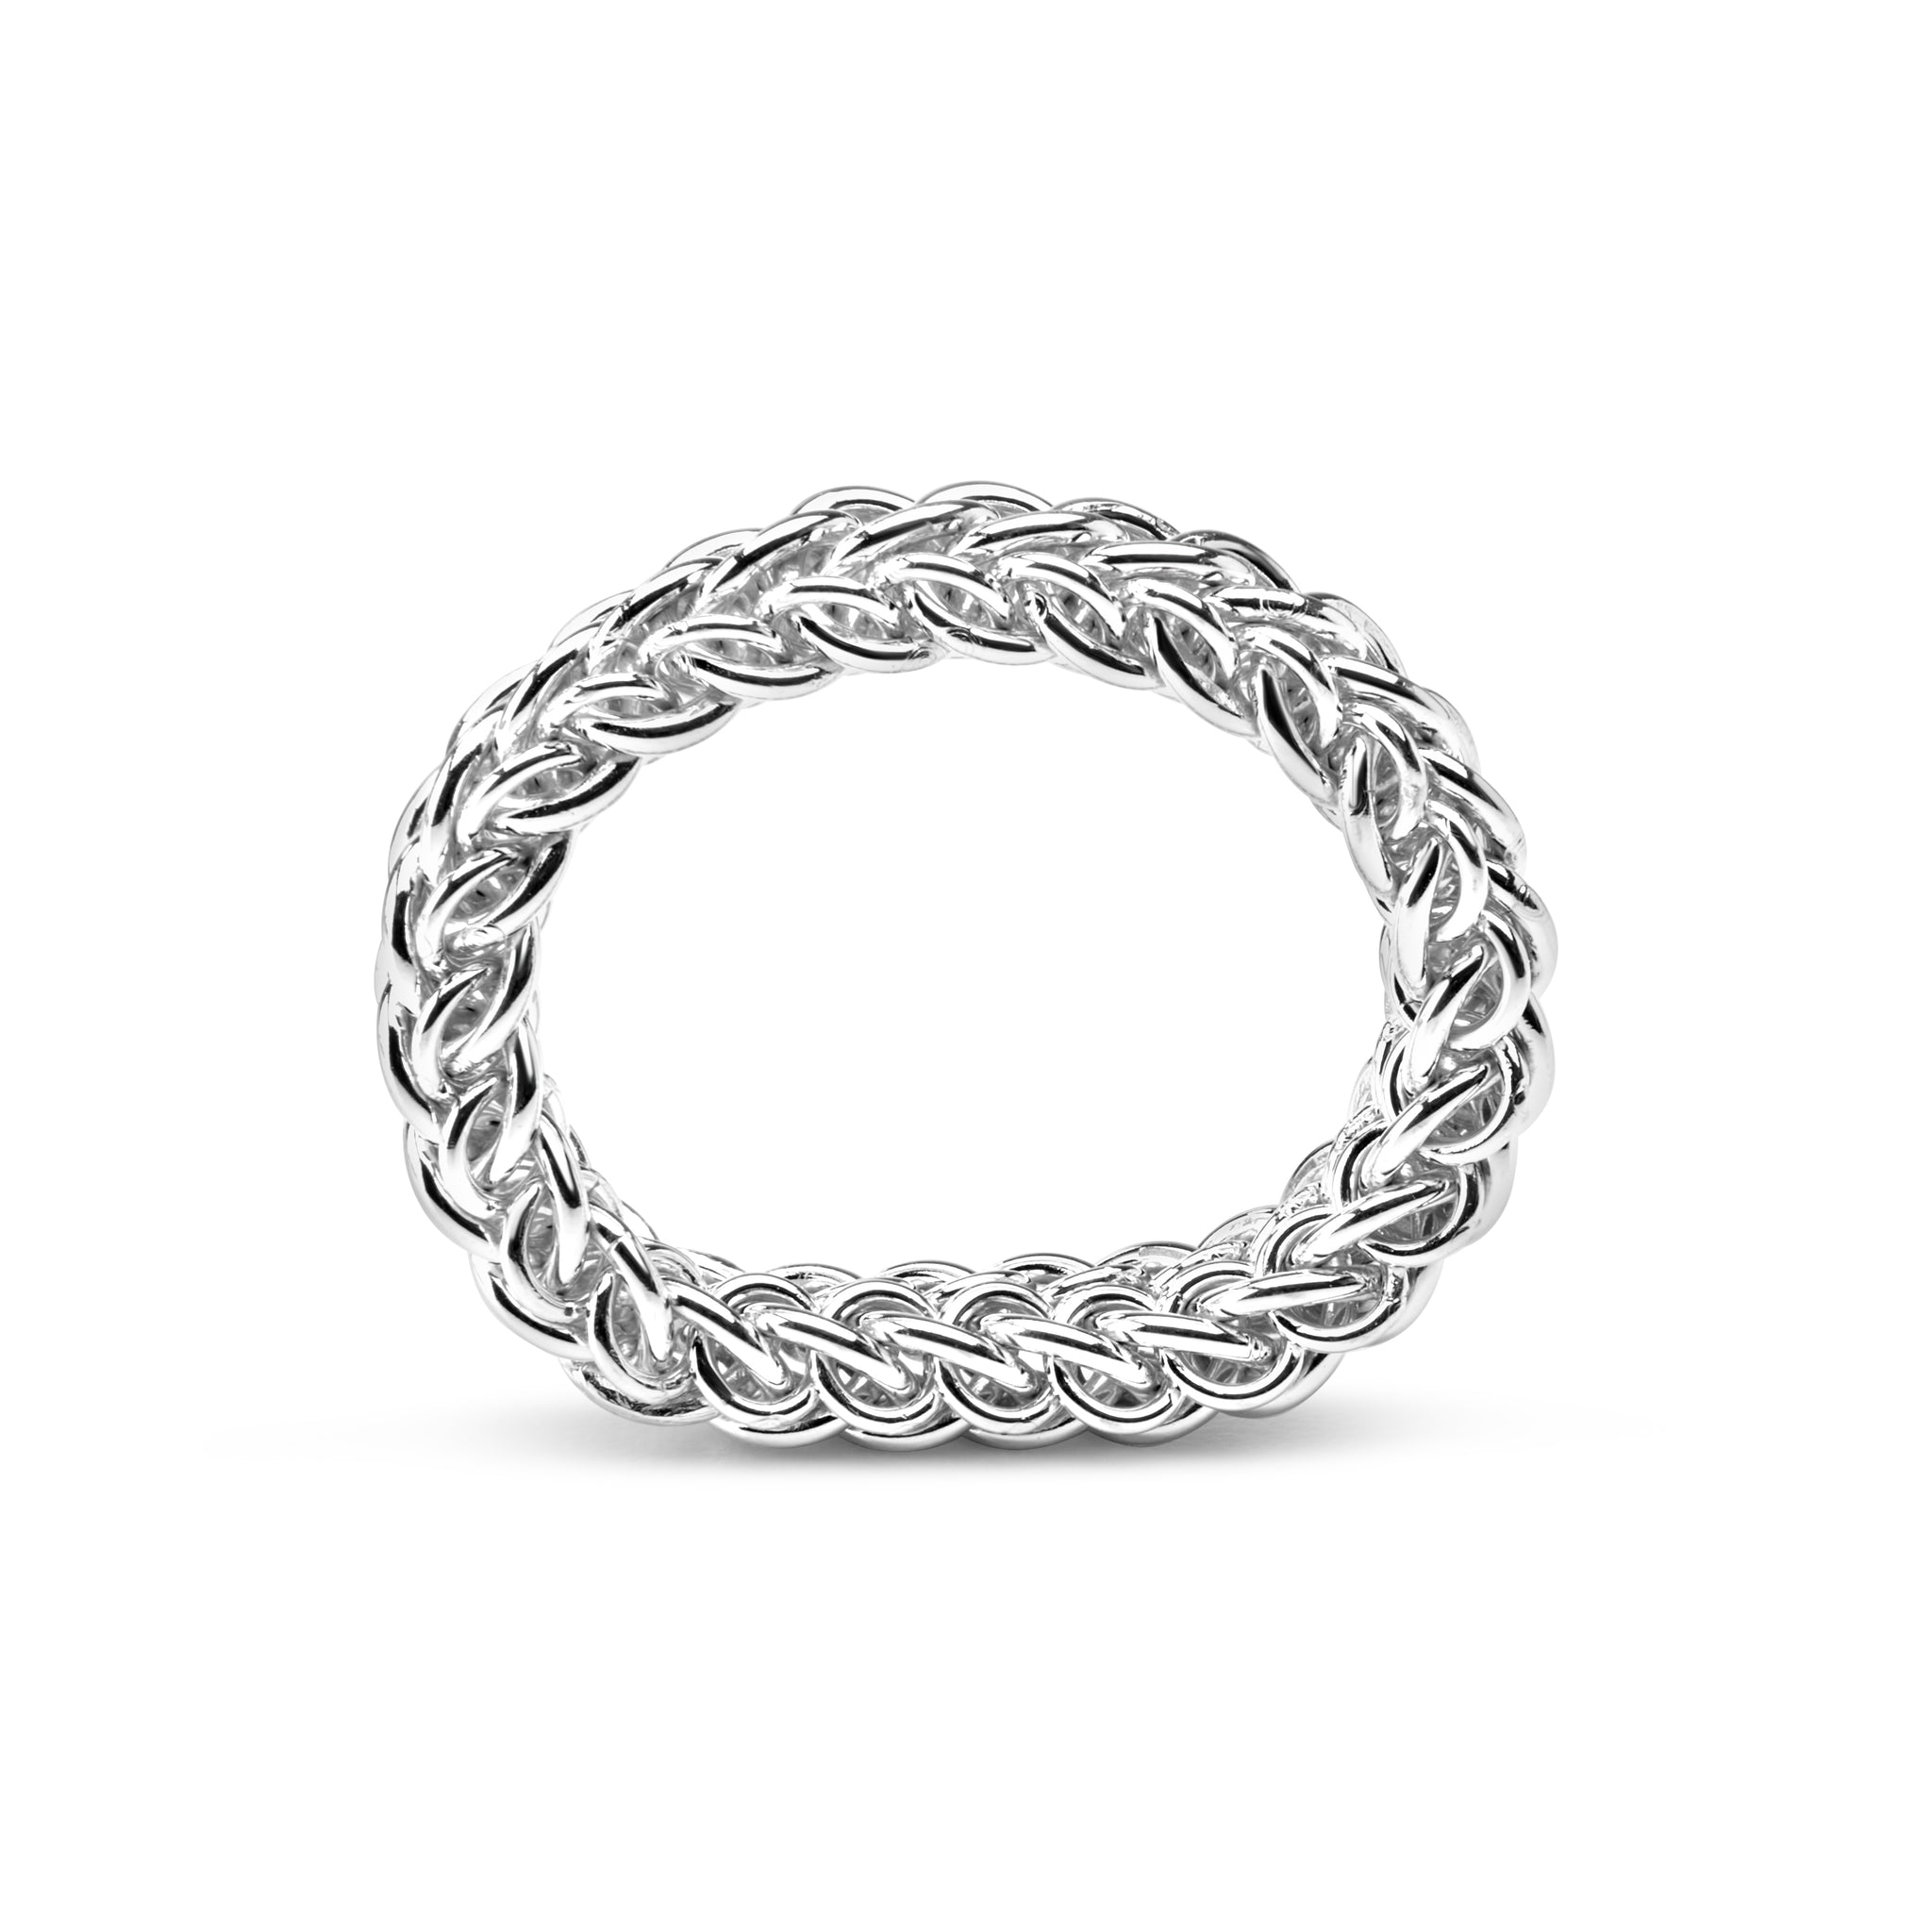 Flexible Byzantine Chainmaille Stack Ring by Femailler, Made in USA